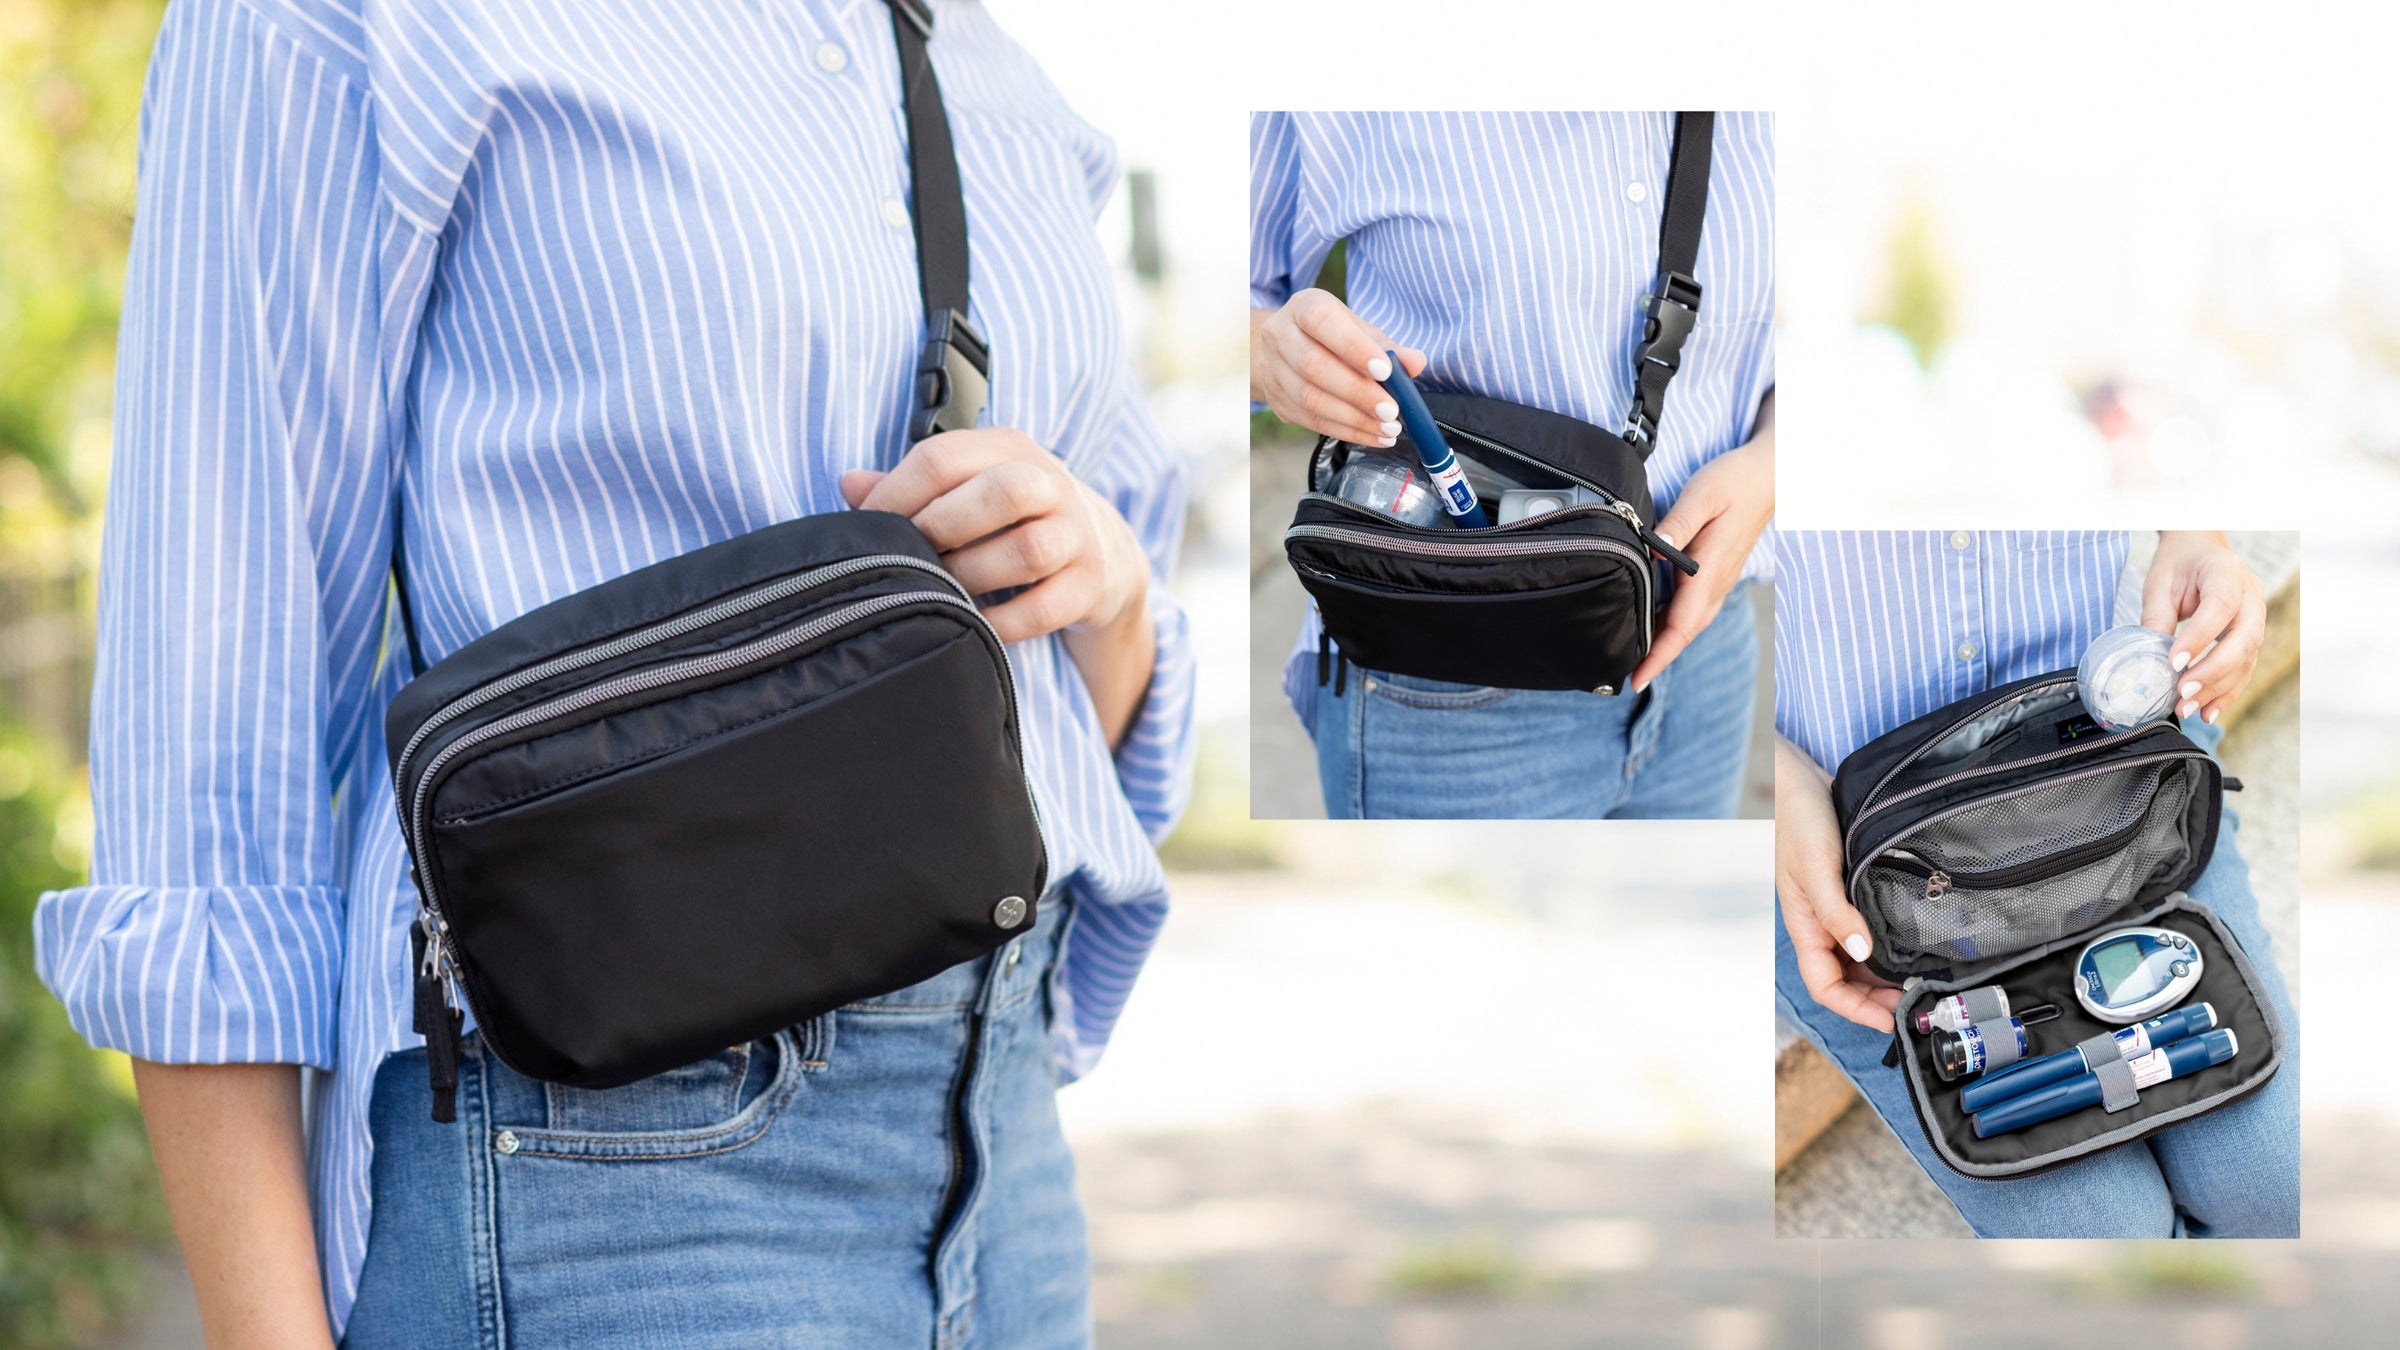 New Arrival of the Black Sugar Medical Diabetes Belt Bag with front pocket to organize your medical supplies and back insulted pocket to keep medicine cool. 